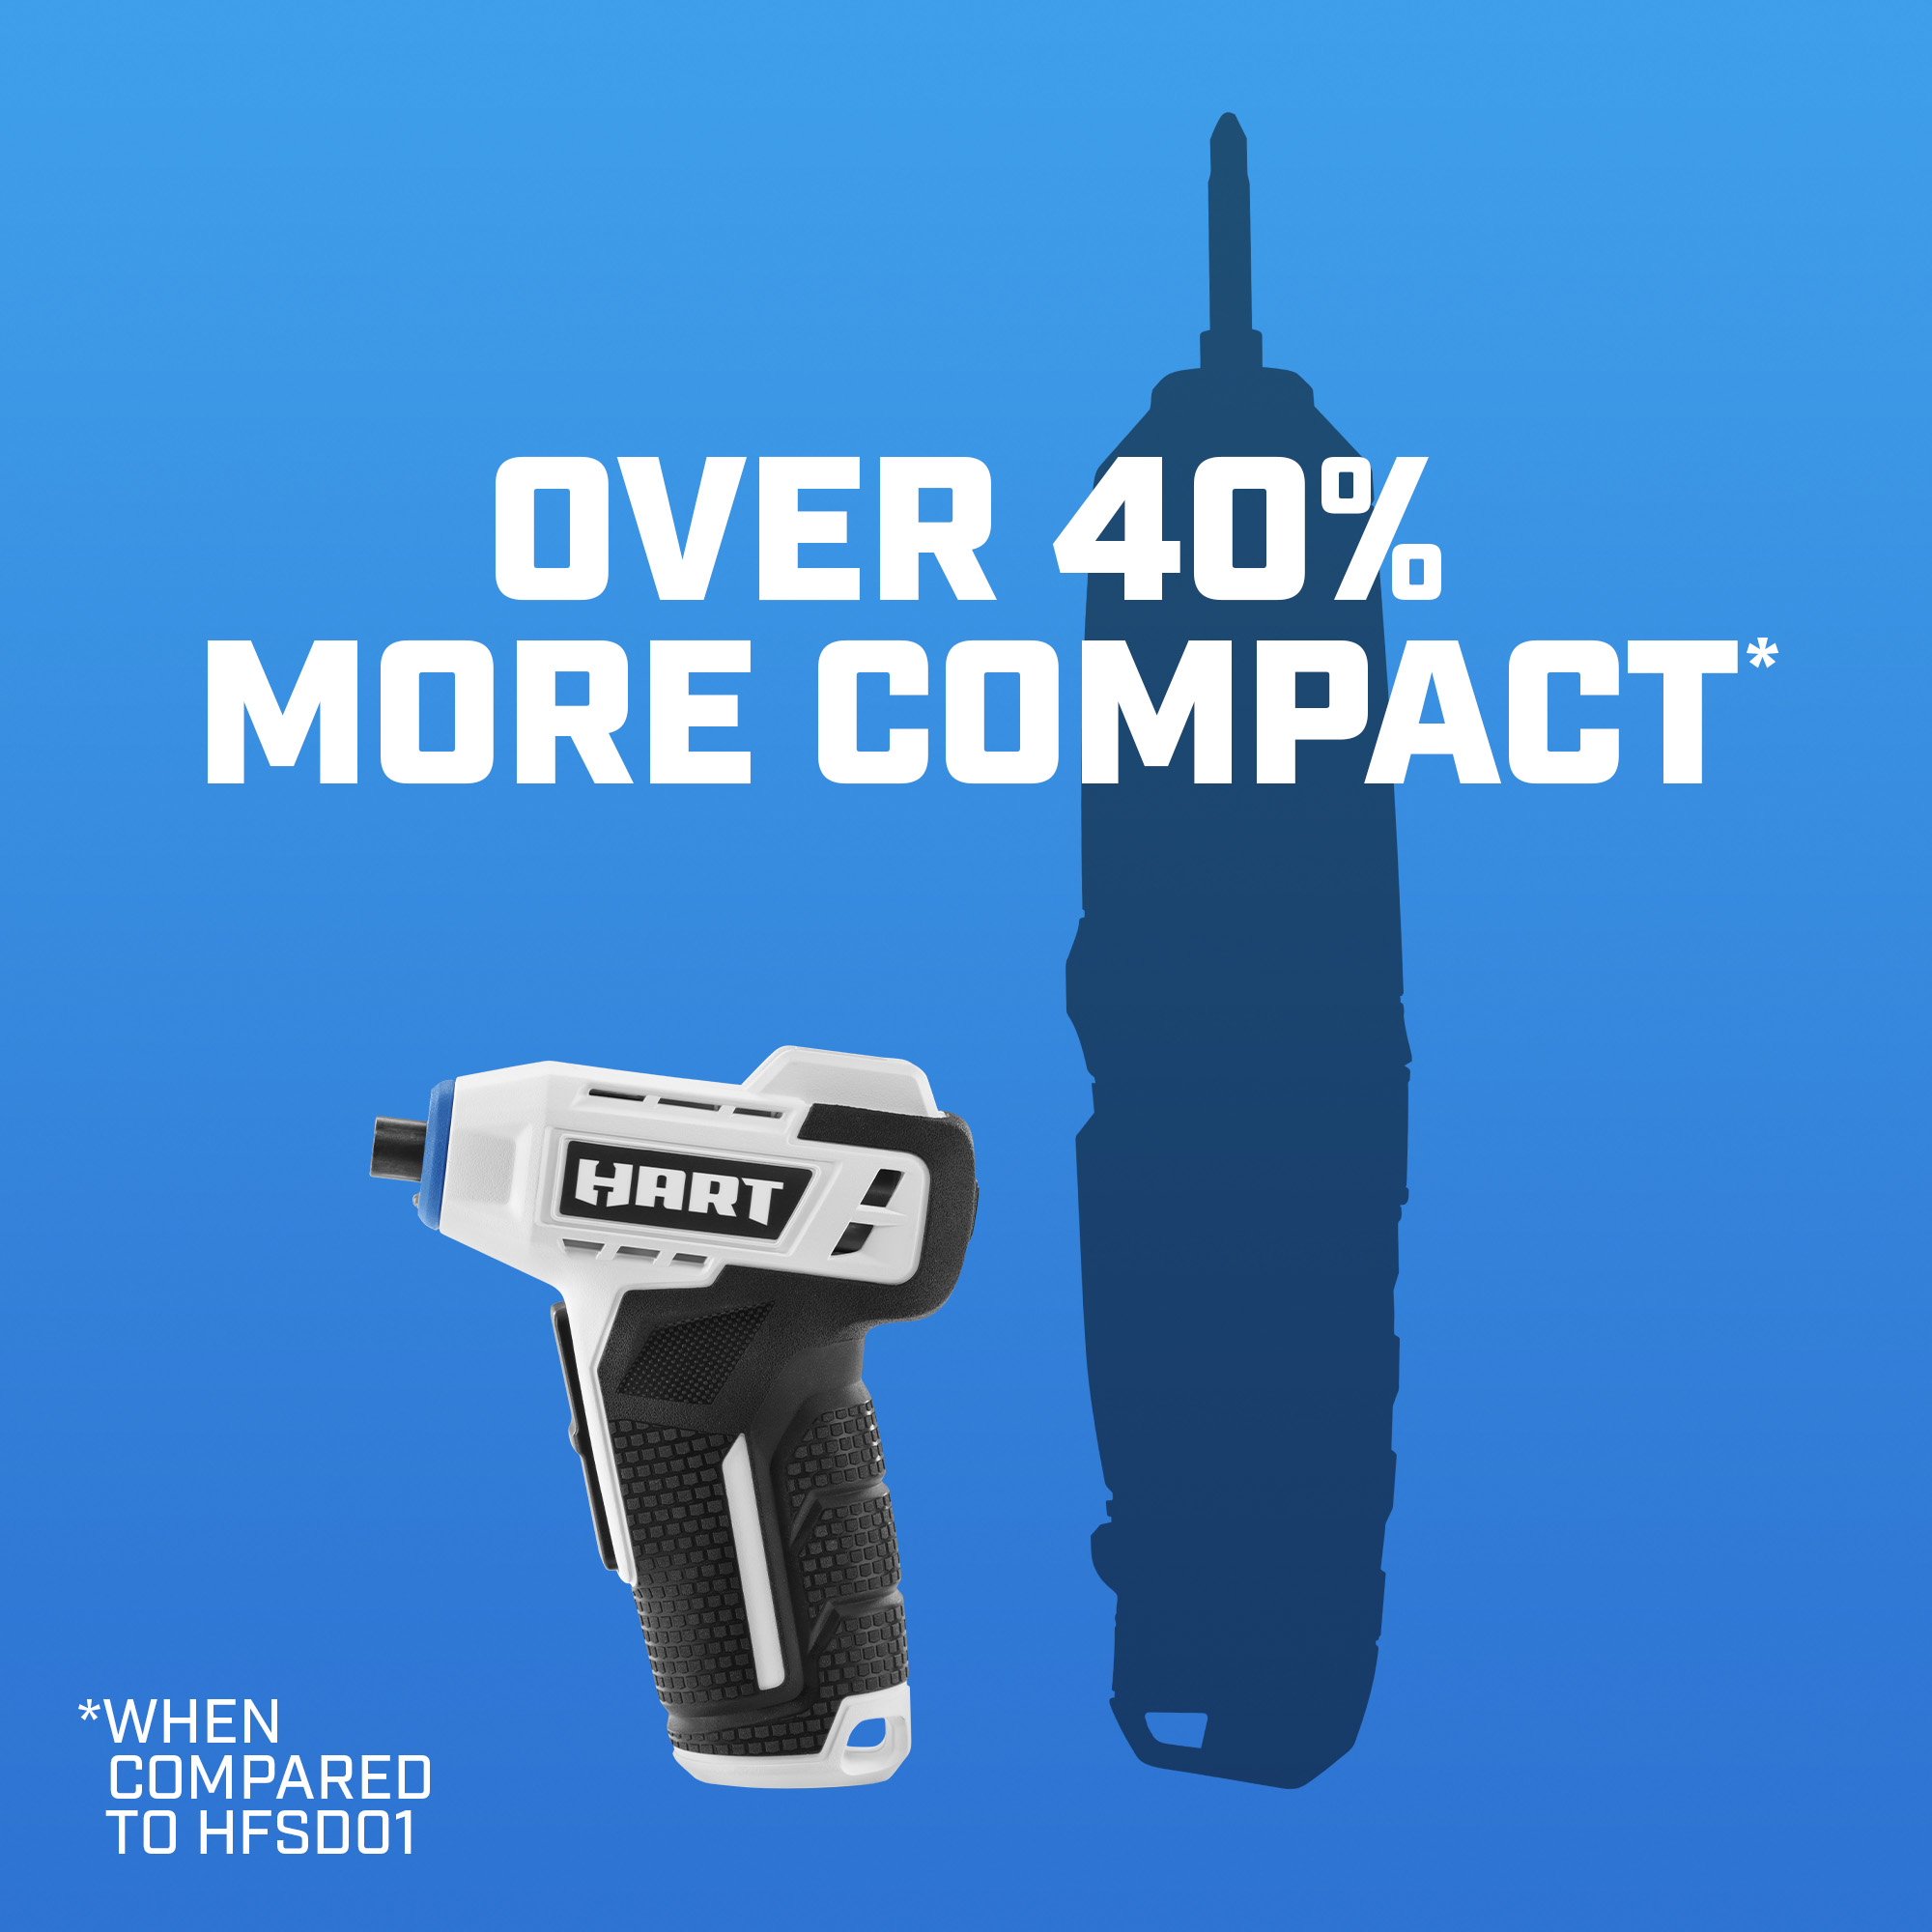 Over 40% More compact